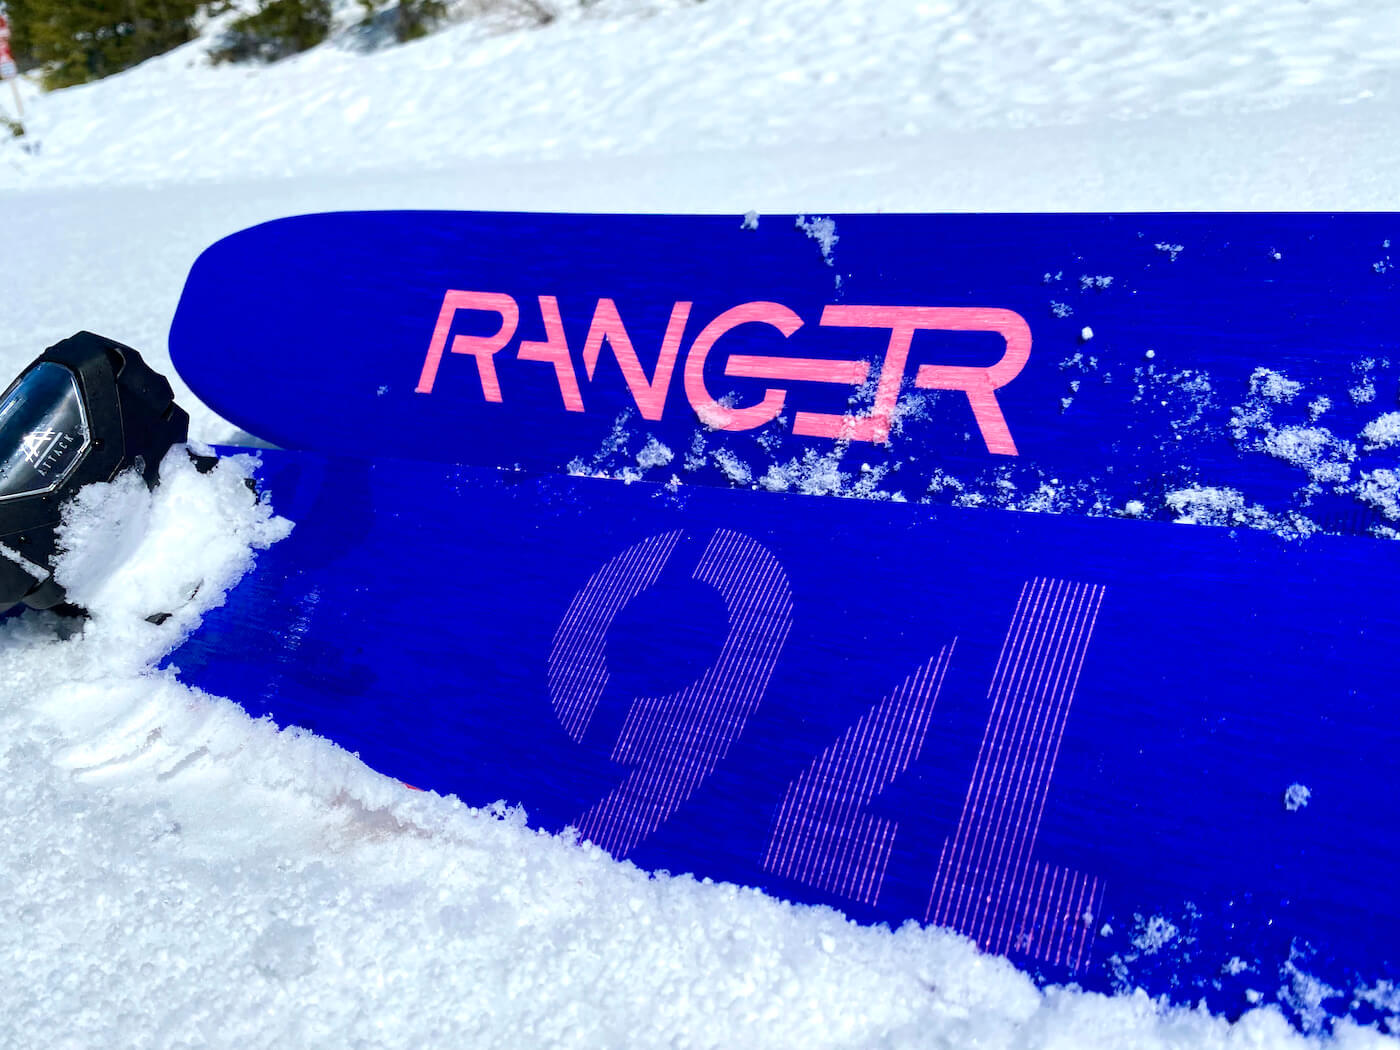 This photo shows a closeup of the Fischer Ranger 94 FR skis in the snow.